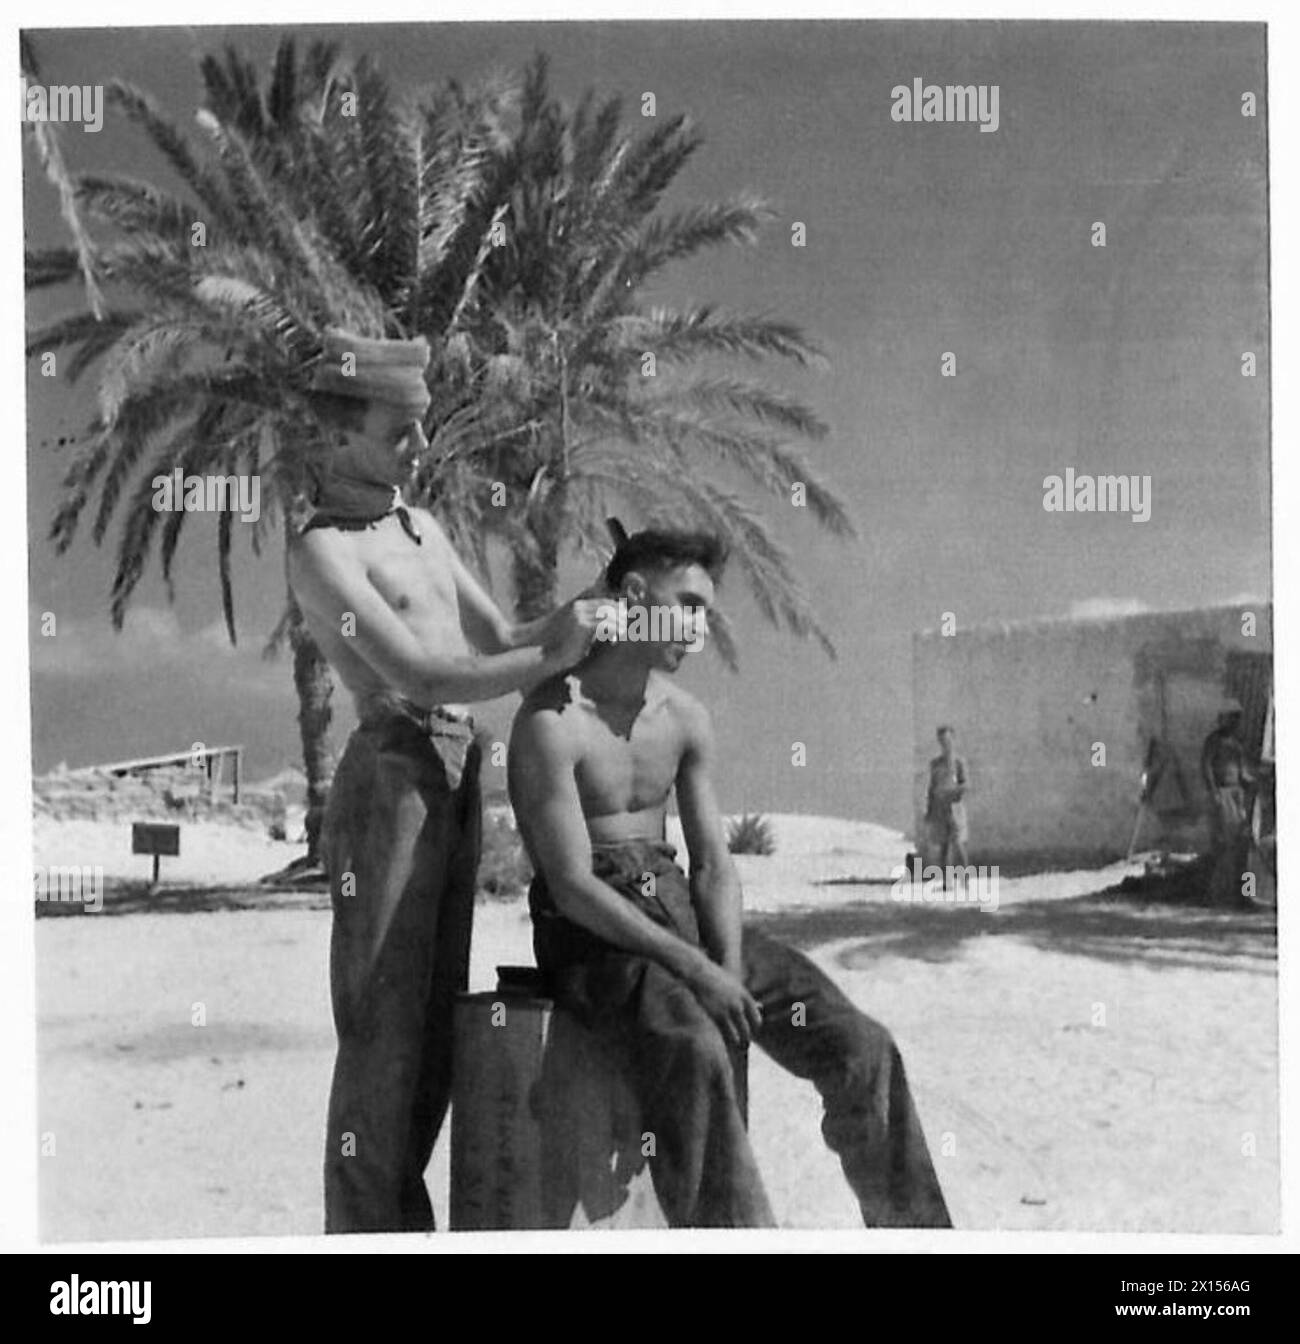 OFFICIAL PHOTOGRAPHS TAKEN IN THE WESTERN DESERT - An impromptu 'Barber's Shop' under the shadows of the palms British Army Stock Photo